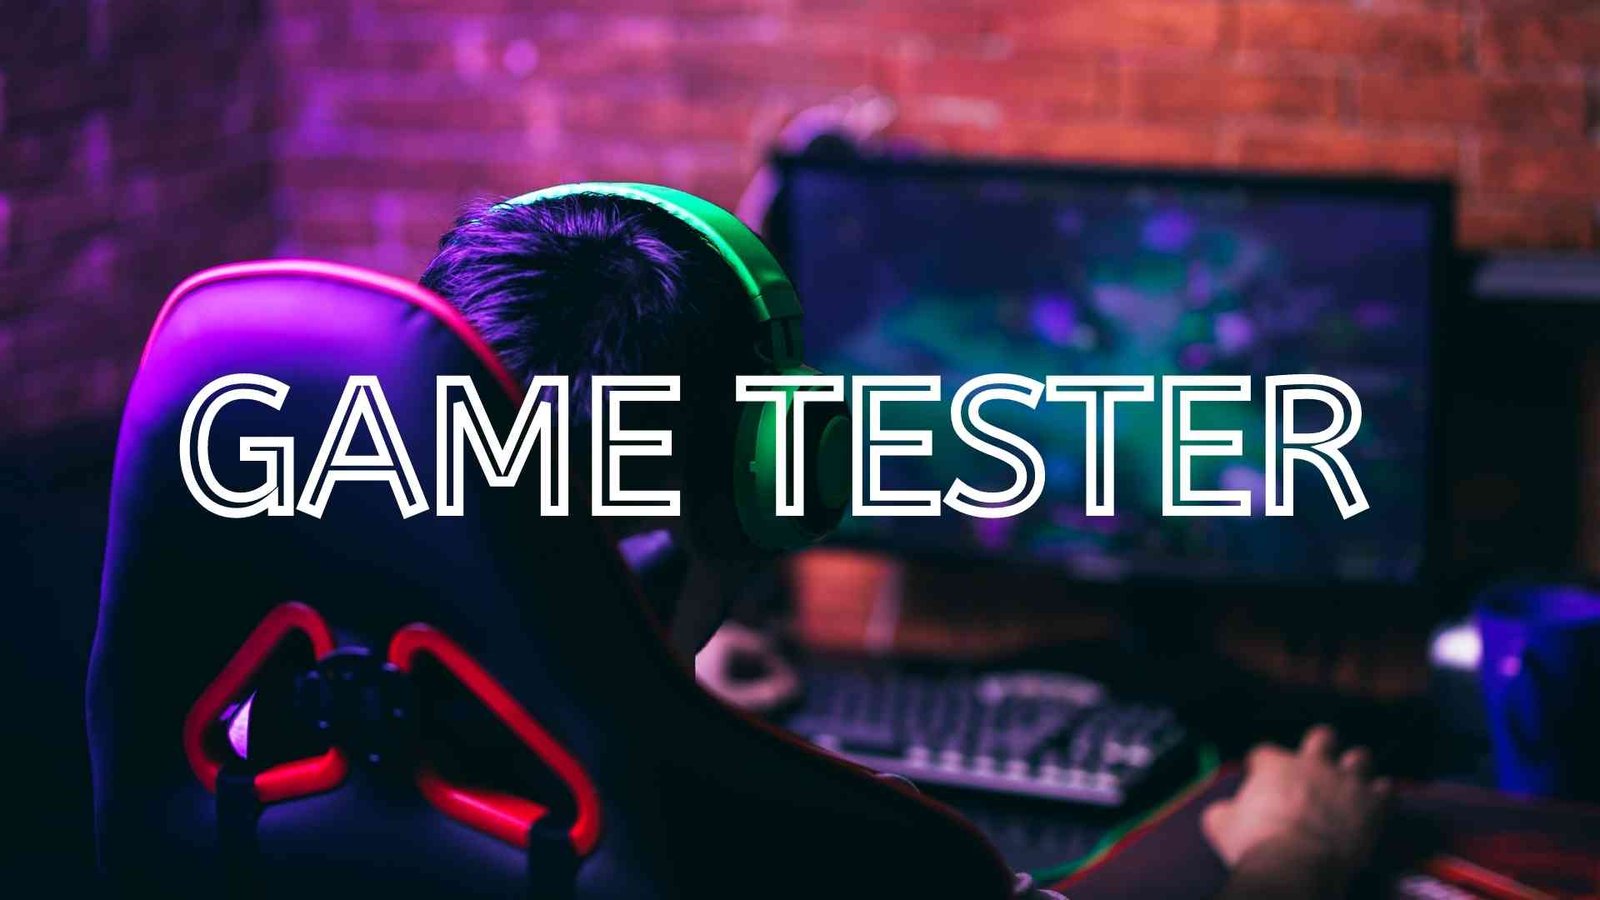 Experienced gamers with extensive gaming experience are needed for the crucial testing phase of video game development